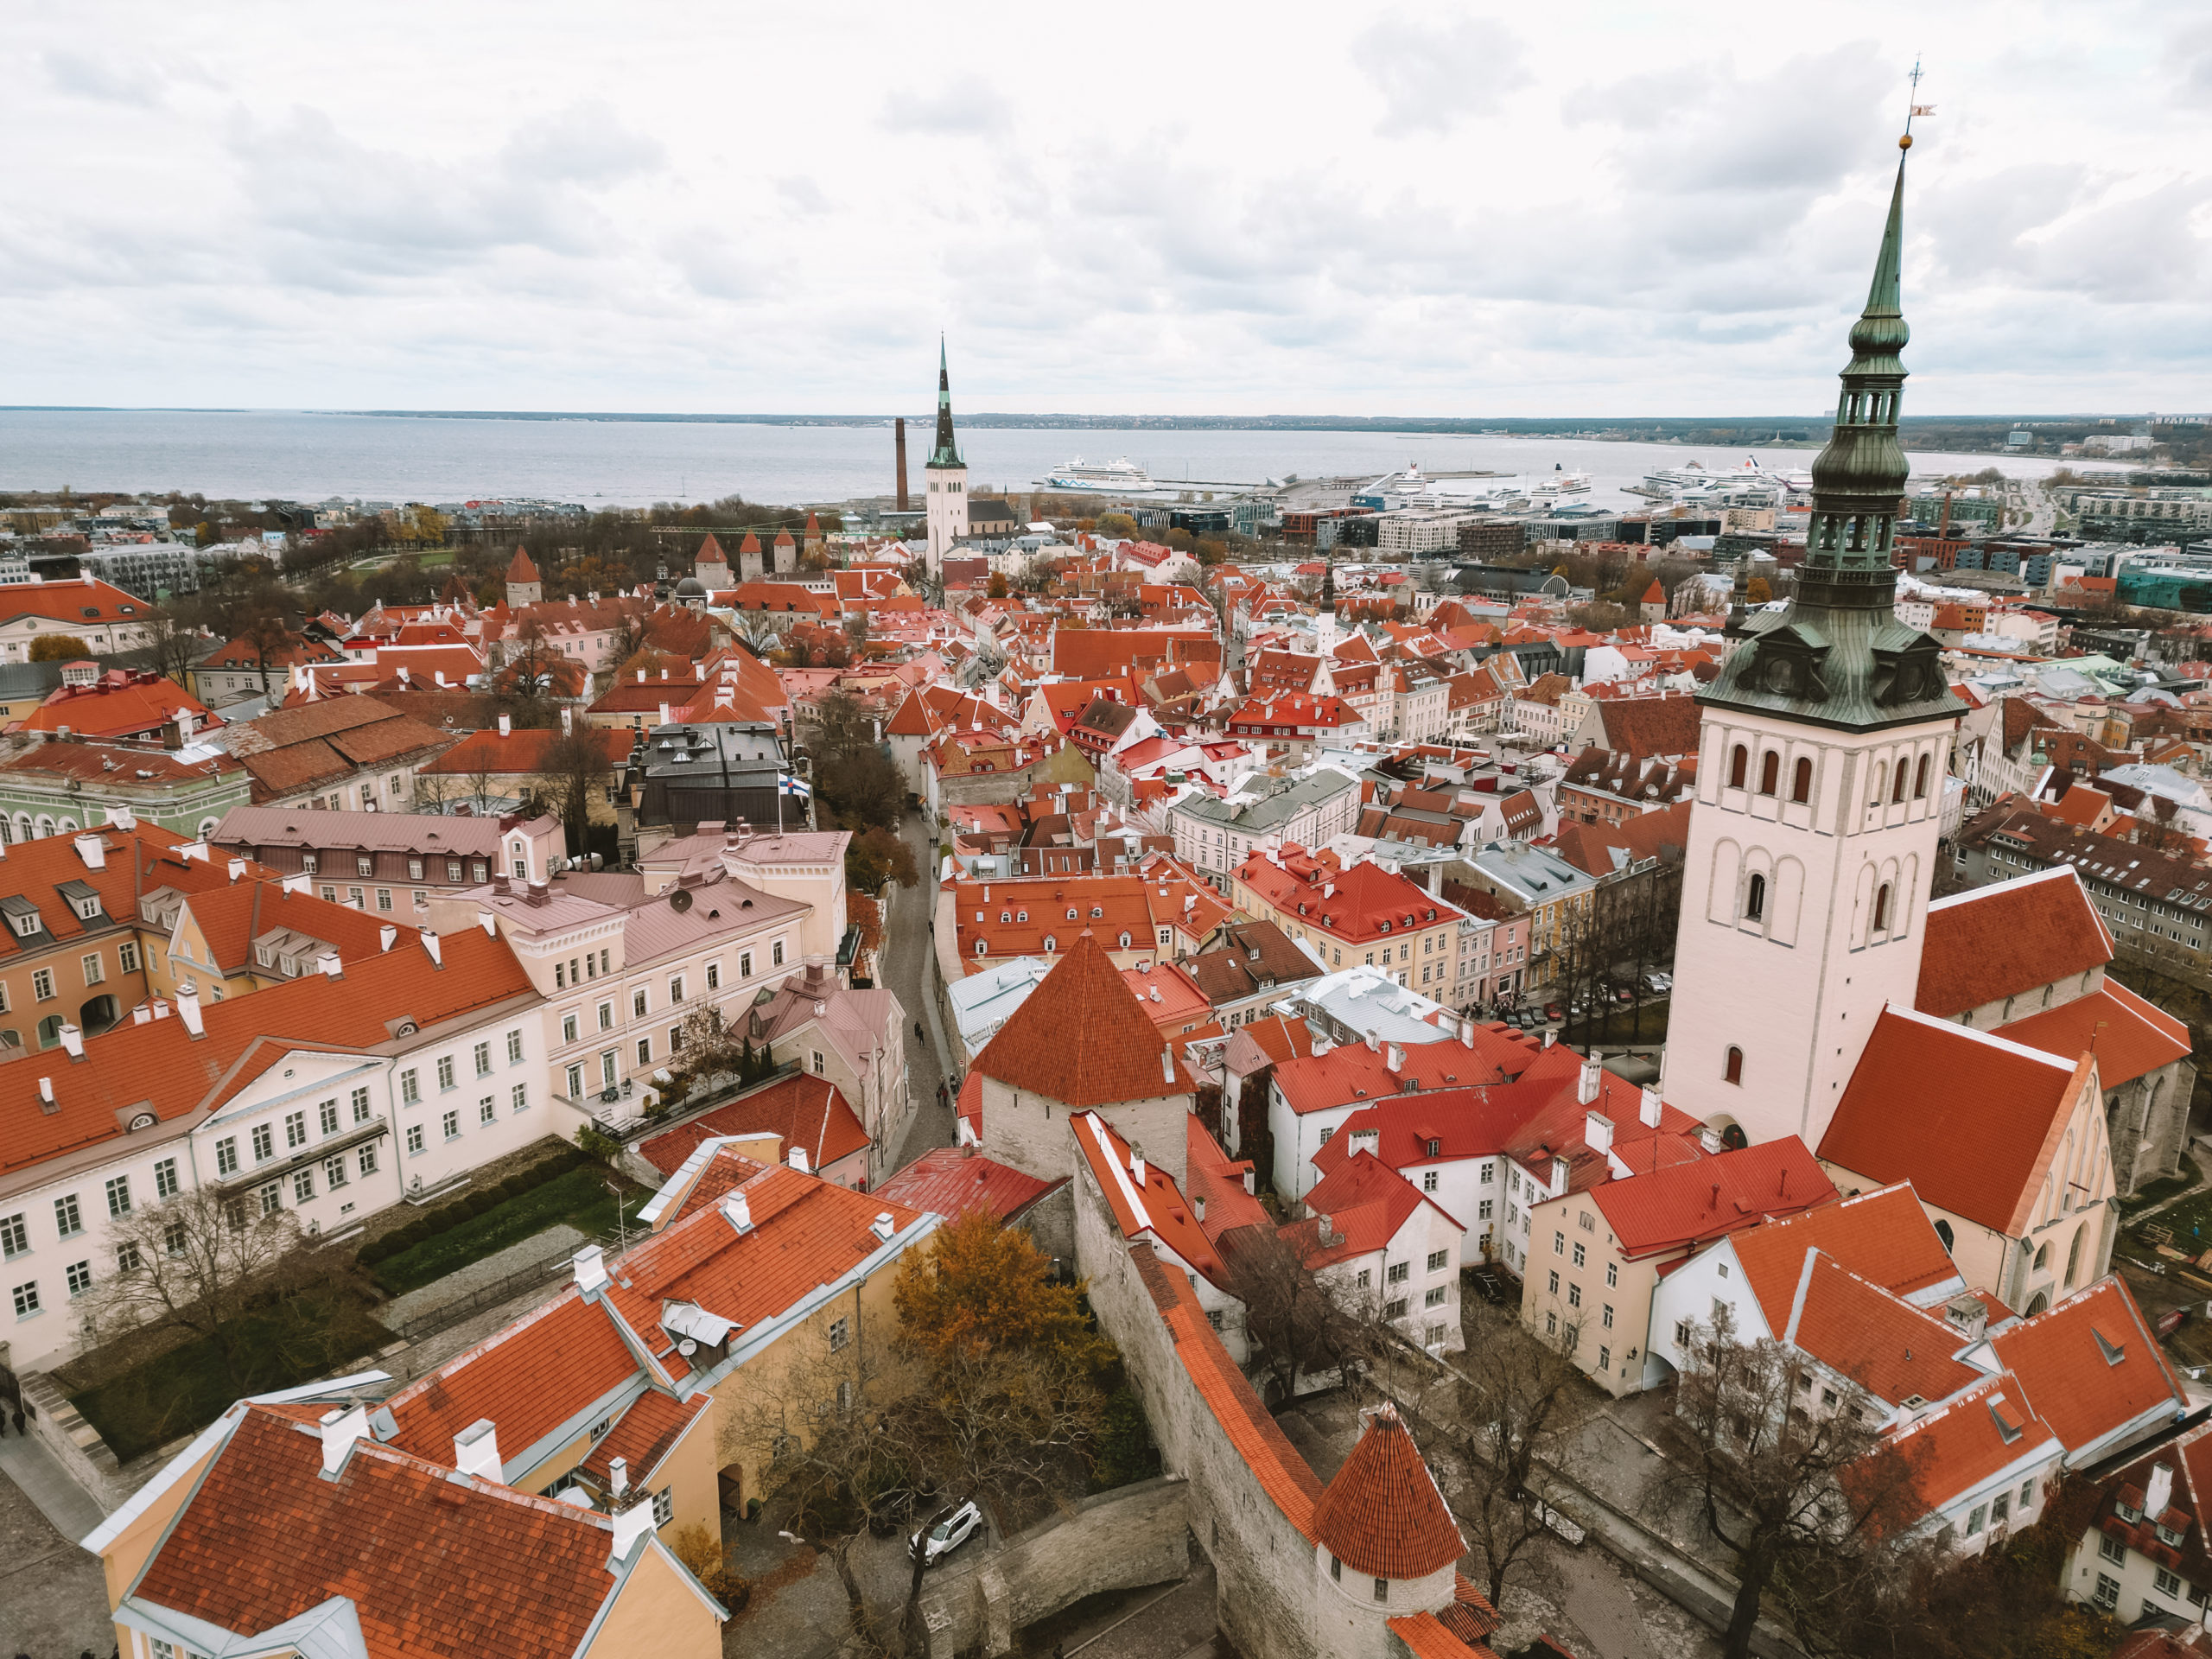 Drone view of Tallinn Estonia's old town - New Girl on the Bloc